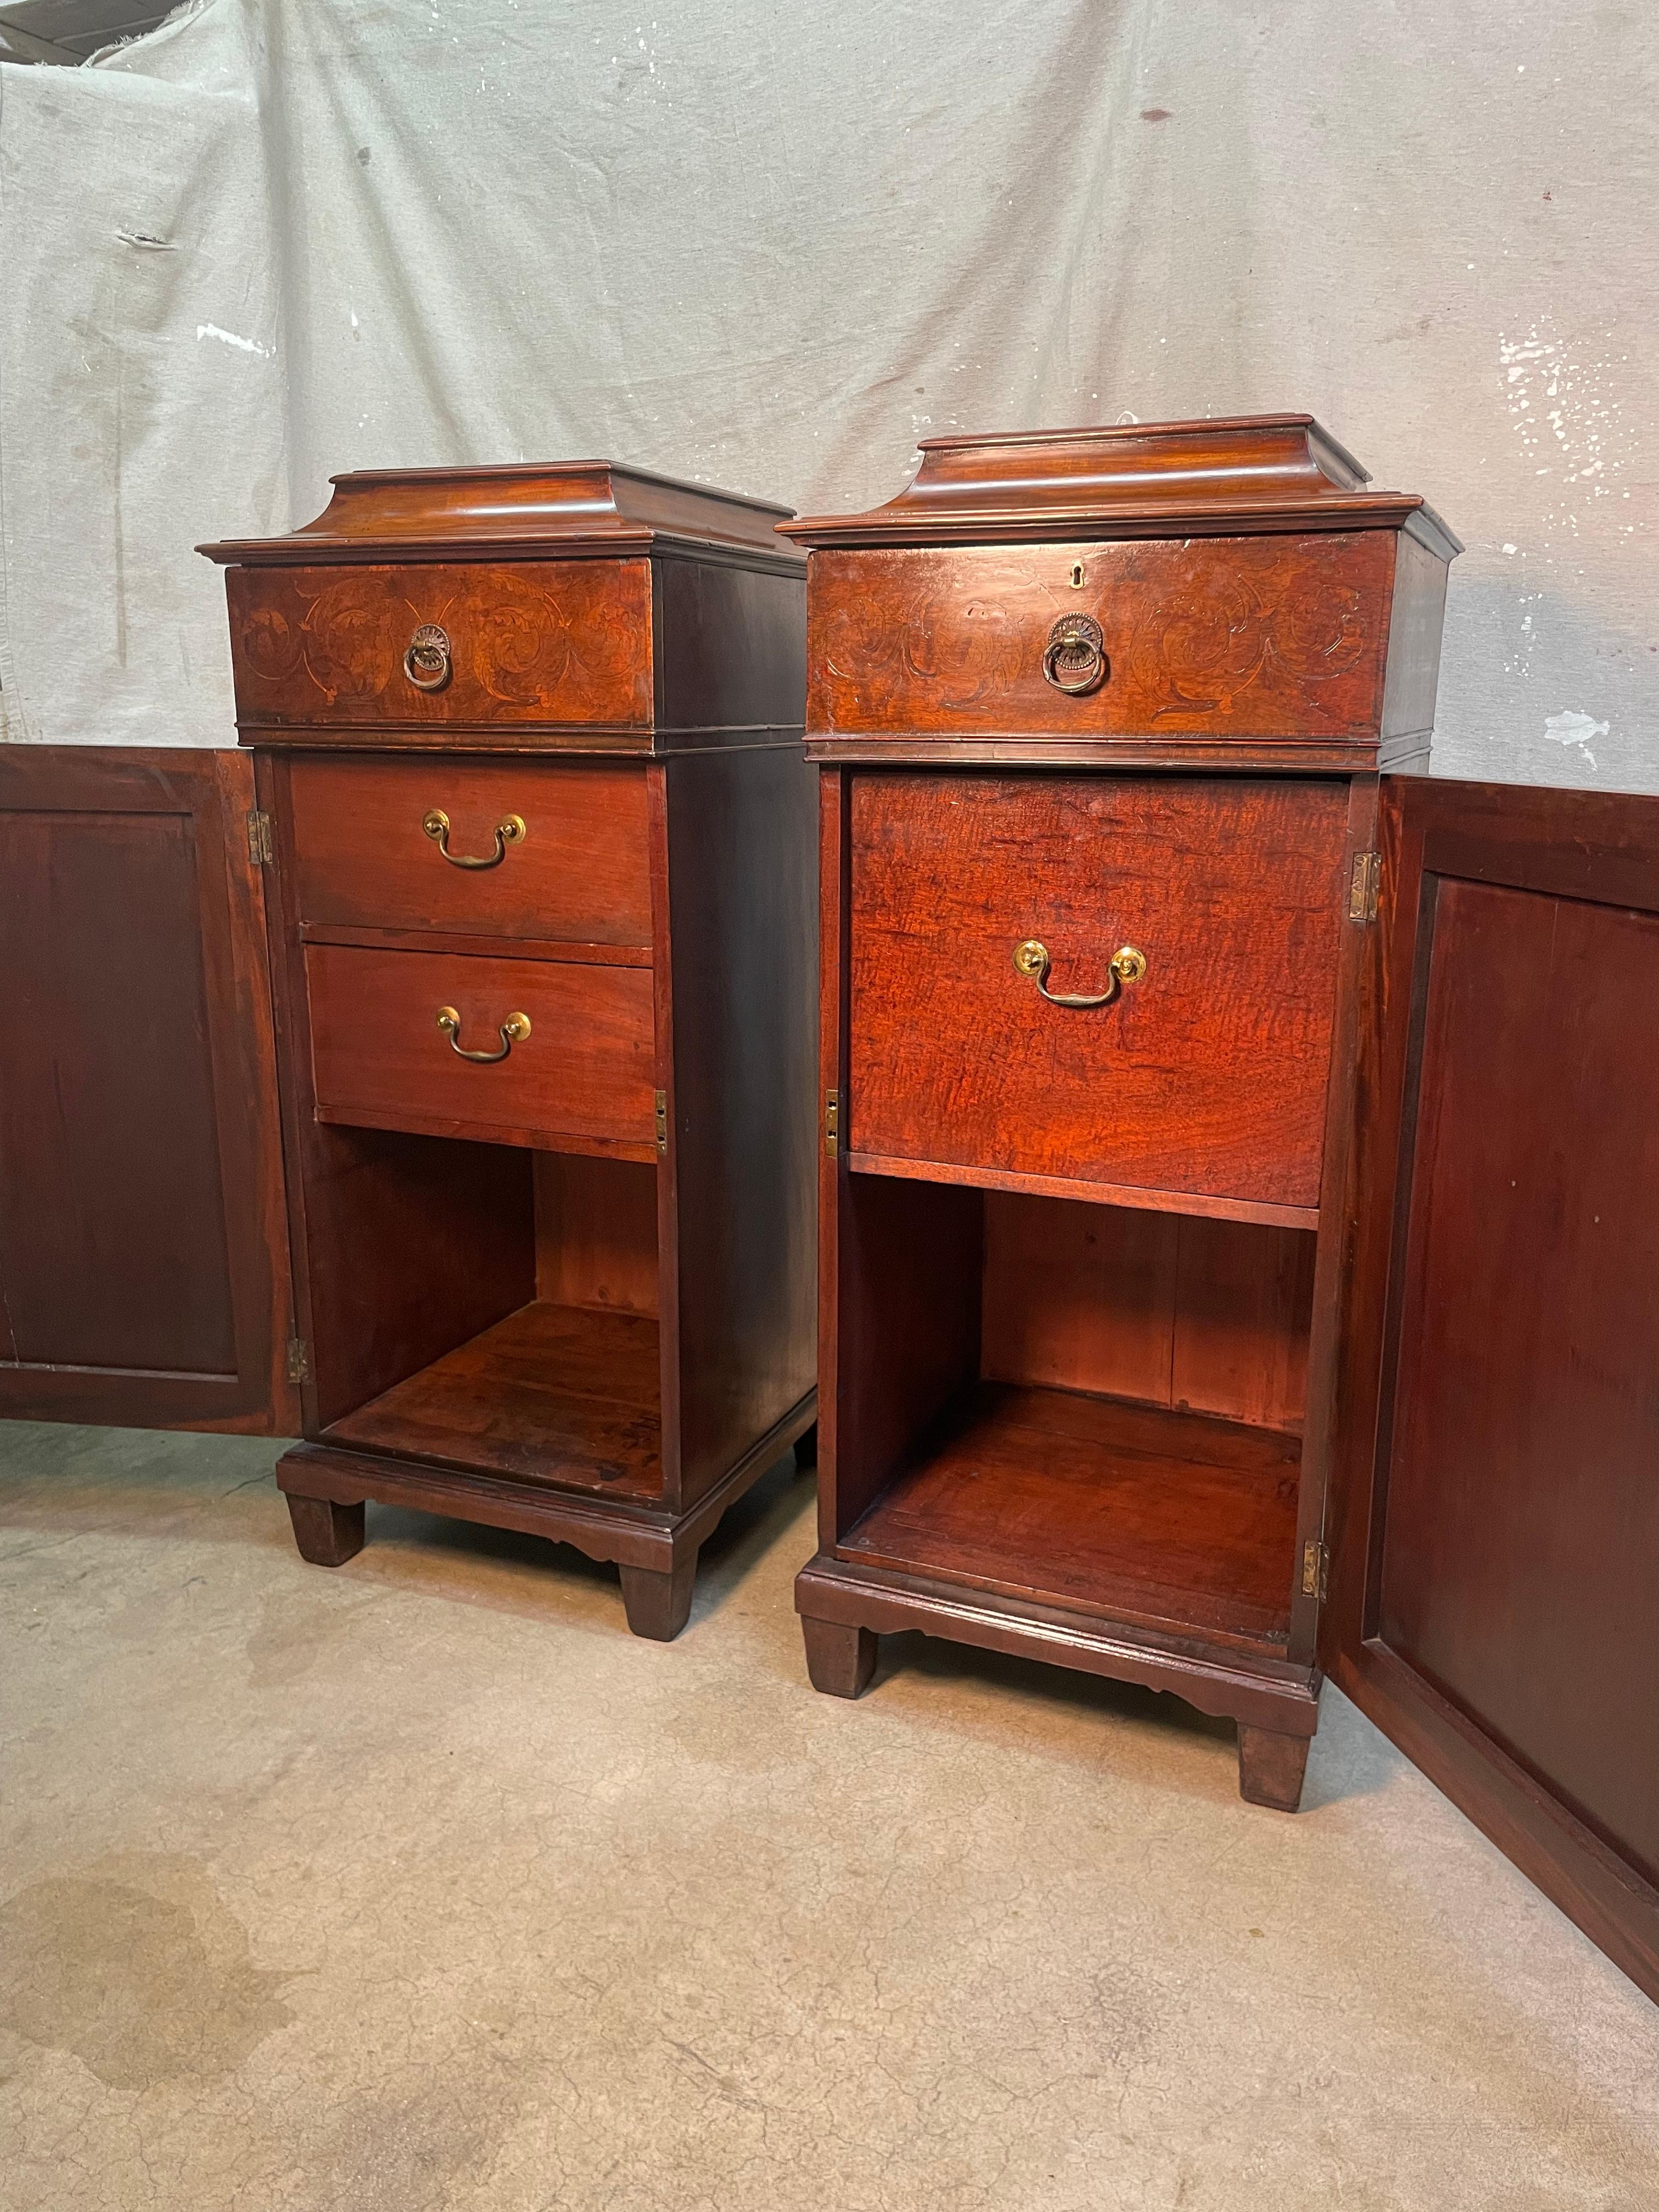 Antique pair of Cellarettes or Liquor Cabinets from England, that were generally custom made wooden chests for storing a small number of alcohol bottles, and the finest silverware. Made from one of the more dependable, strong woods of mahogany. Has